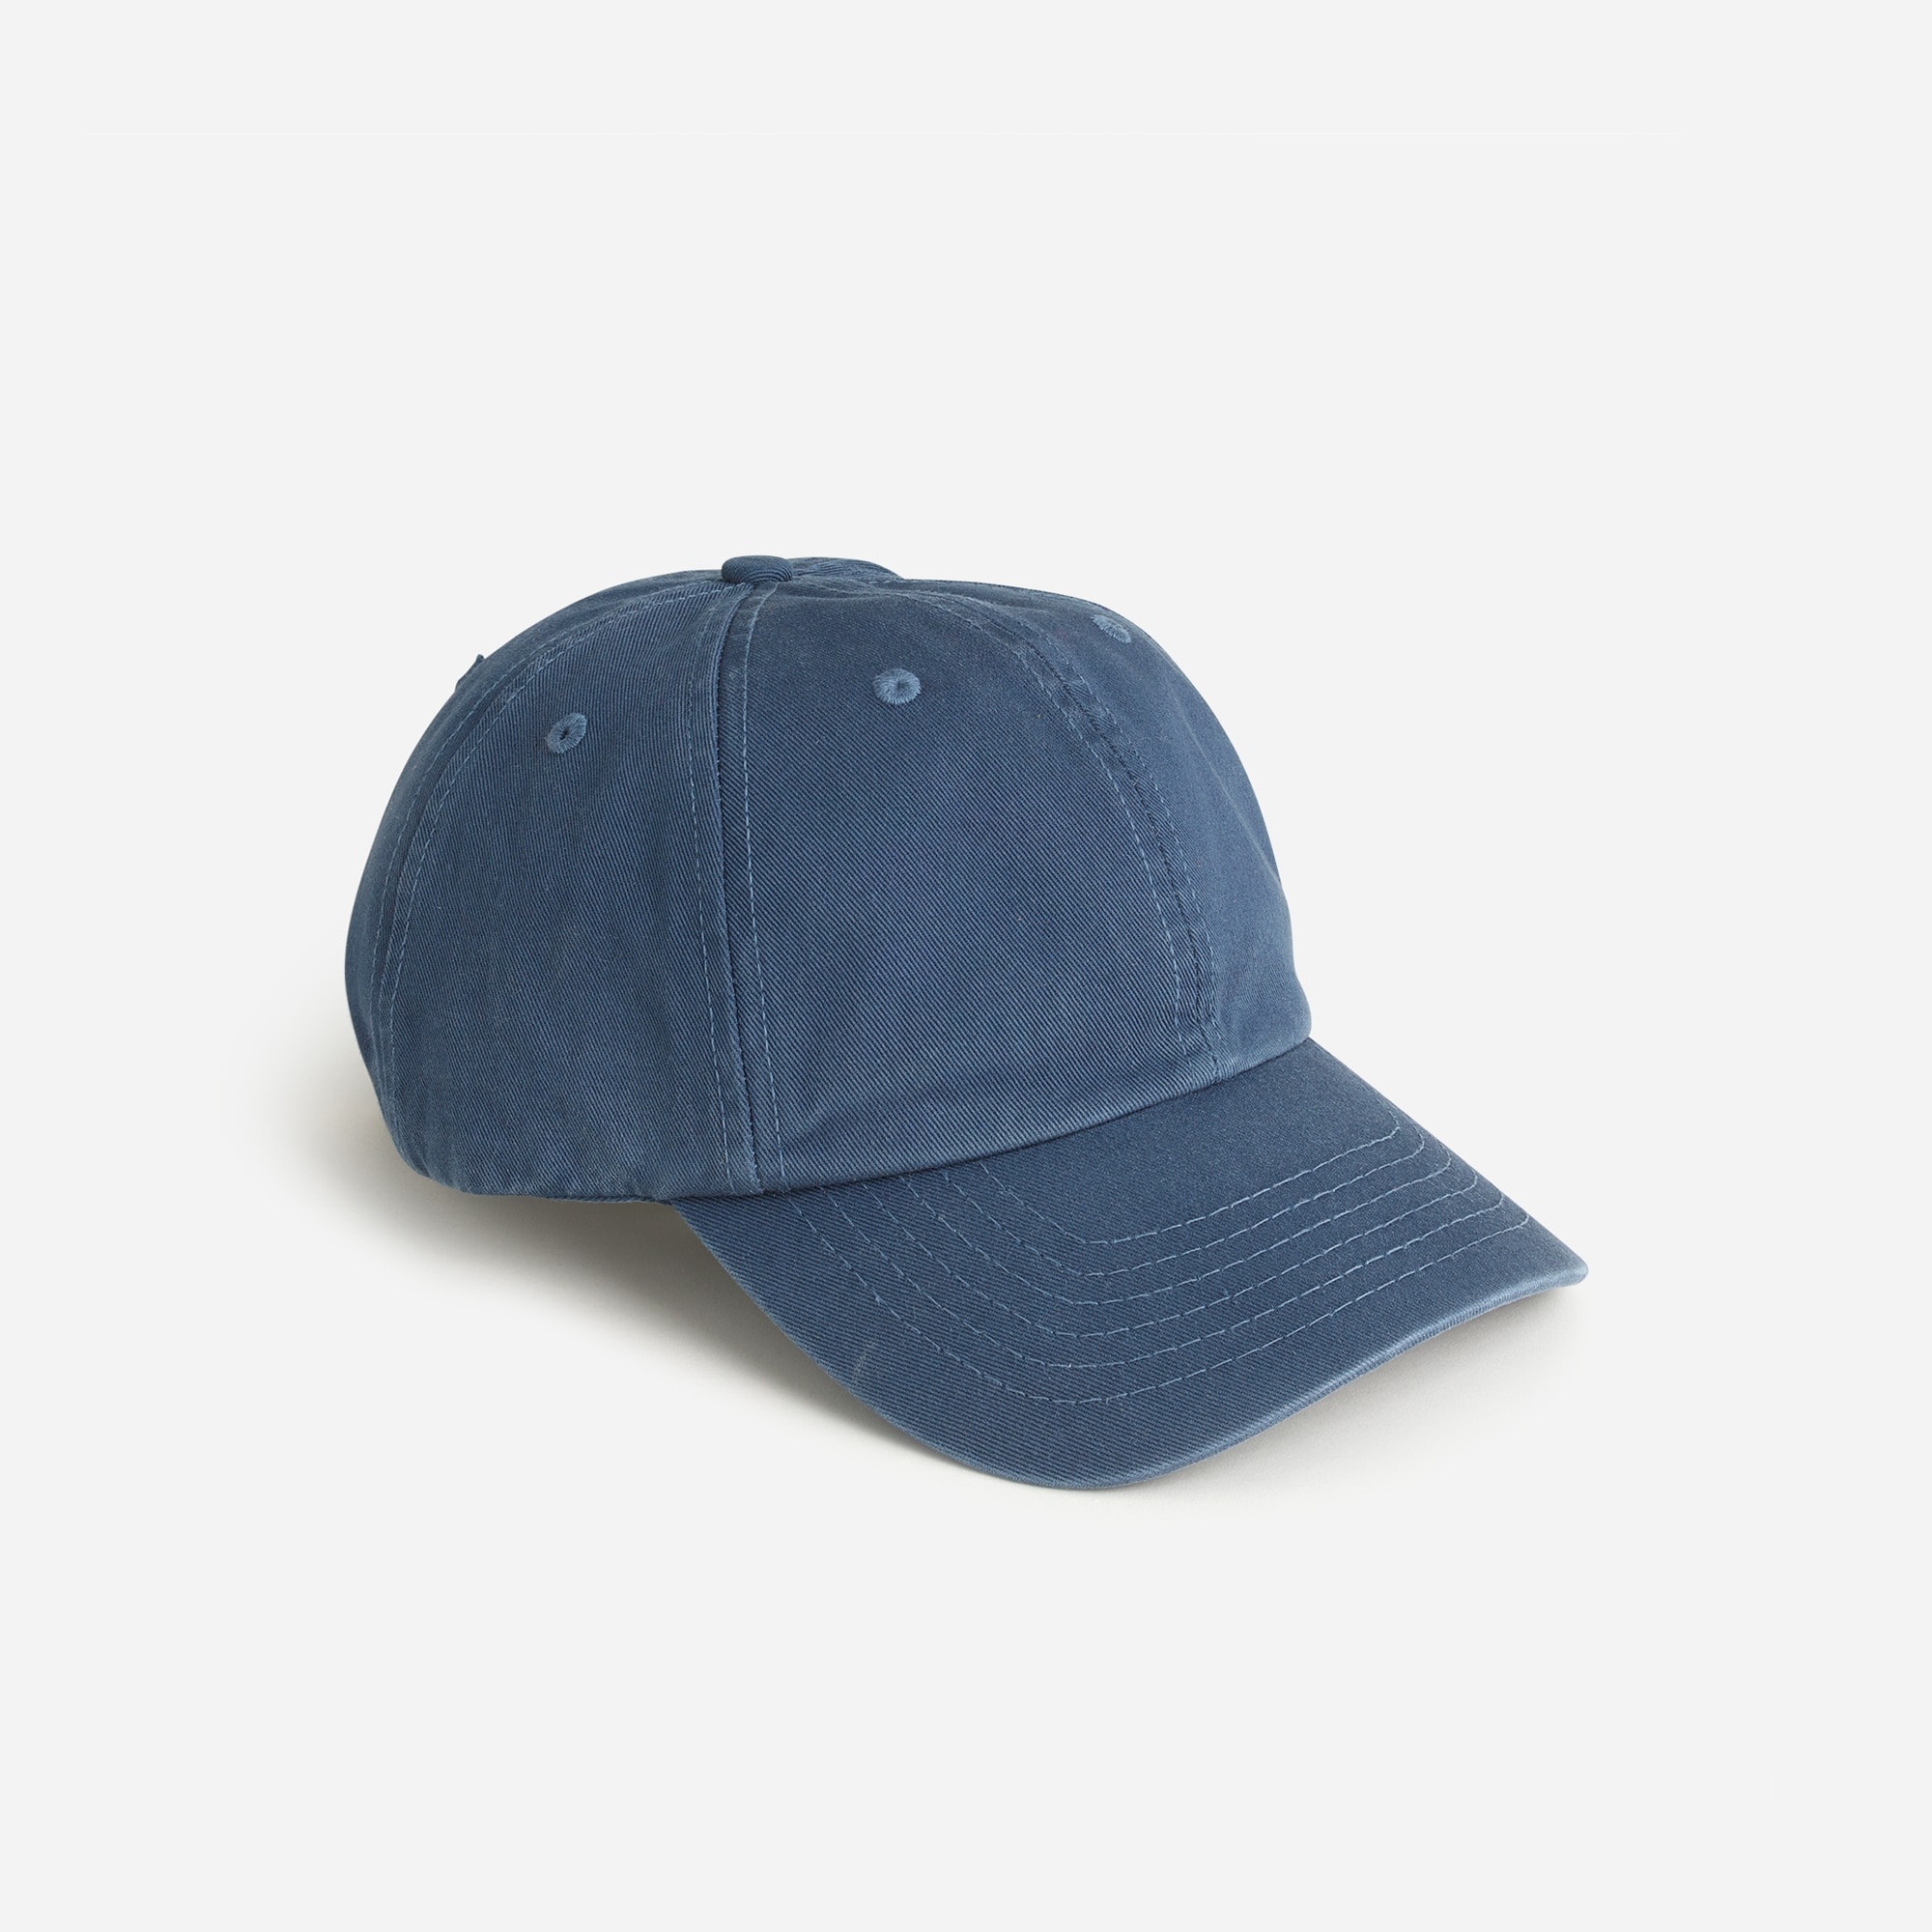 J.Crew: Made-in-the-USA Garment-dyed Twill Baseball Cap For Men